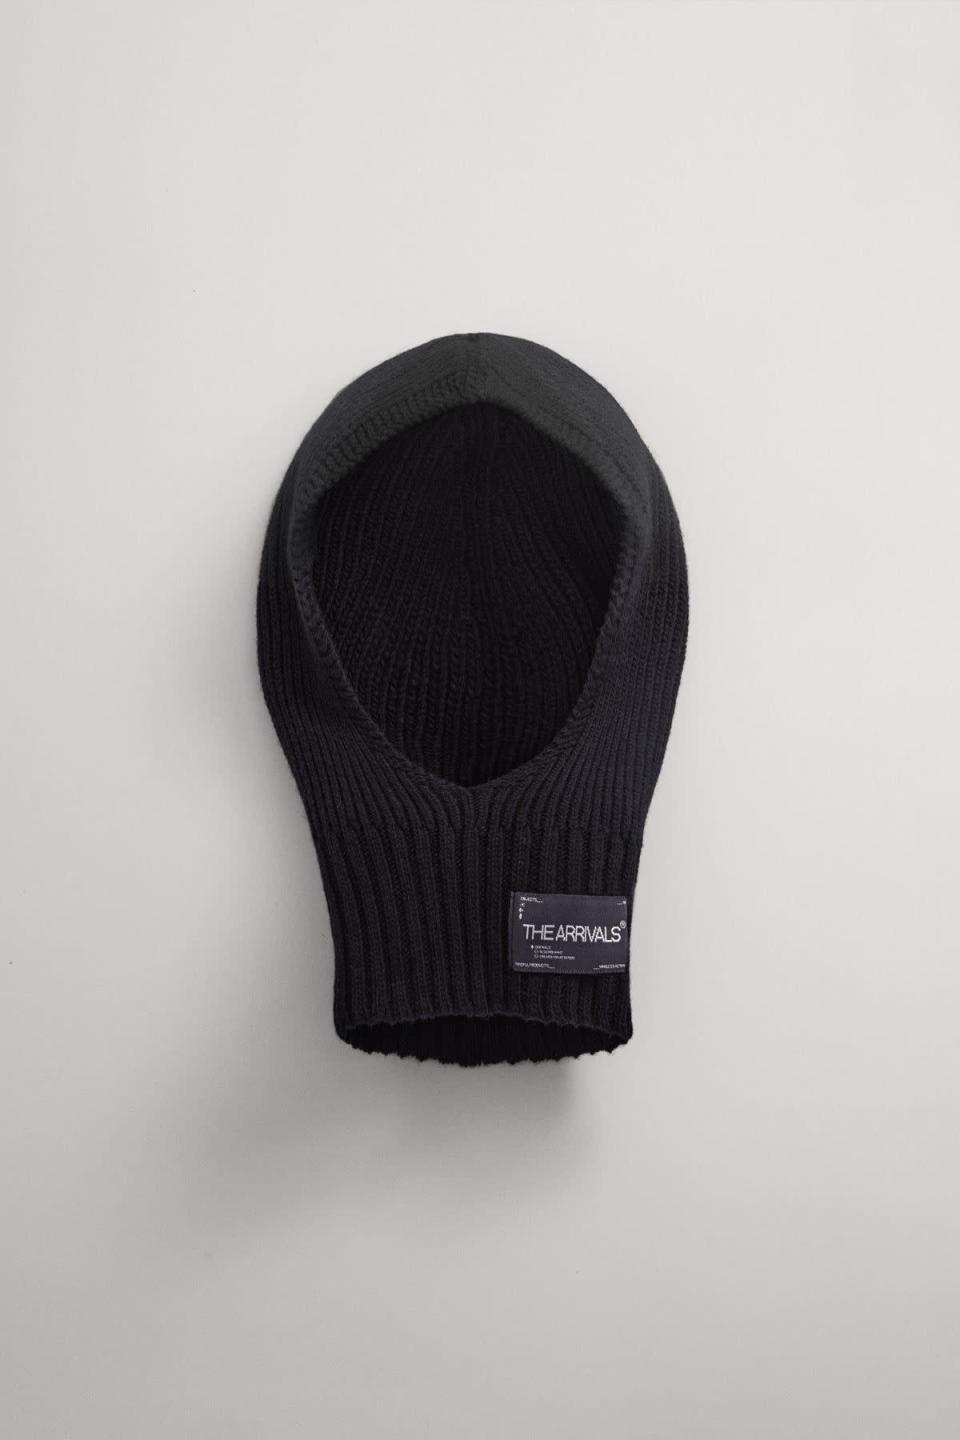 <p><strong>The Arrivals</strong></p><p>thearrivals.com</p><p><strong>$85.00</strong></p><p>Hate when your neck is cold? Wish you were dressed for the slopes 24/7? The Arrivals made this balaclava that feels like a beanie but also for your neck. </p>